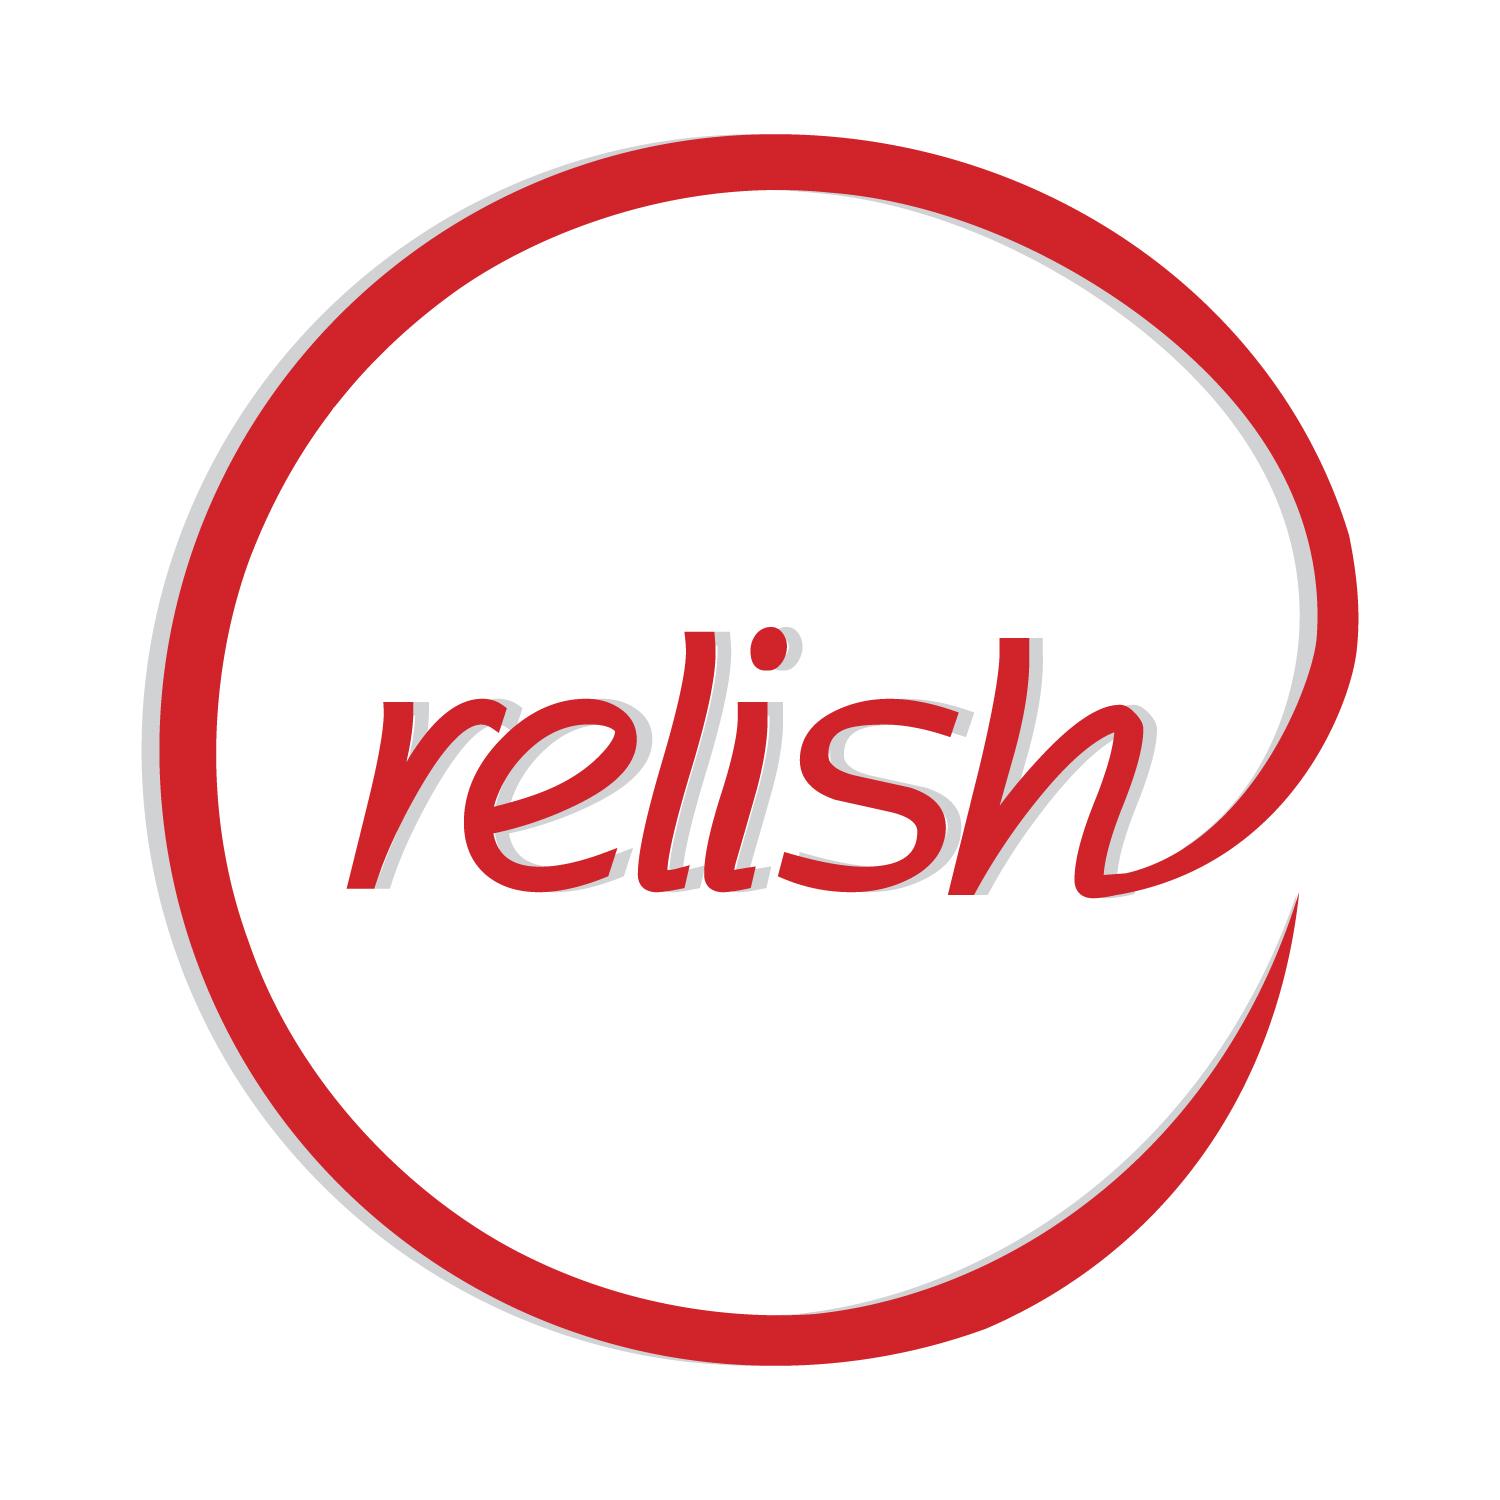 Speed Dating Chicago | Presented by Relish Dating | Singles Events in Chicago